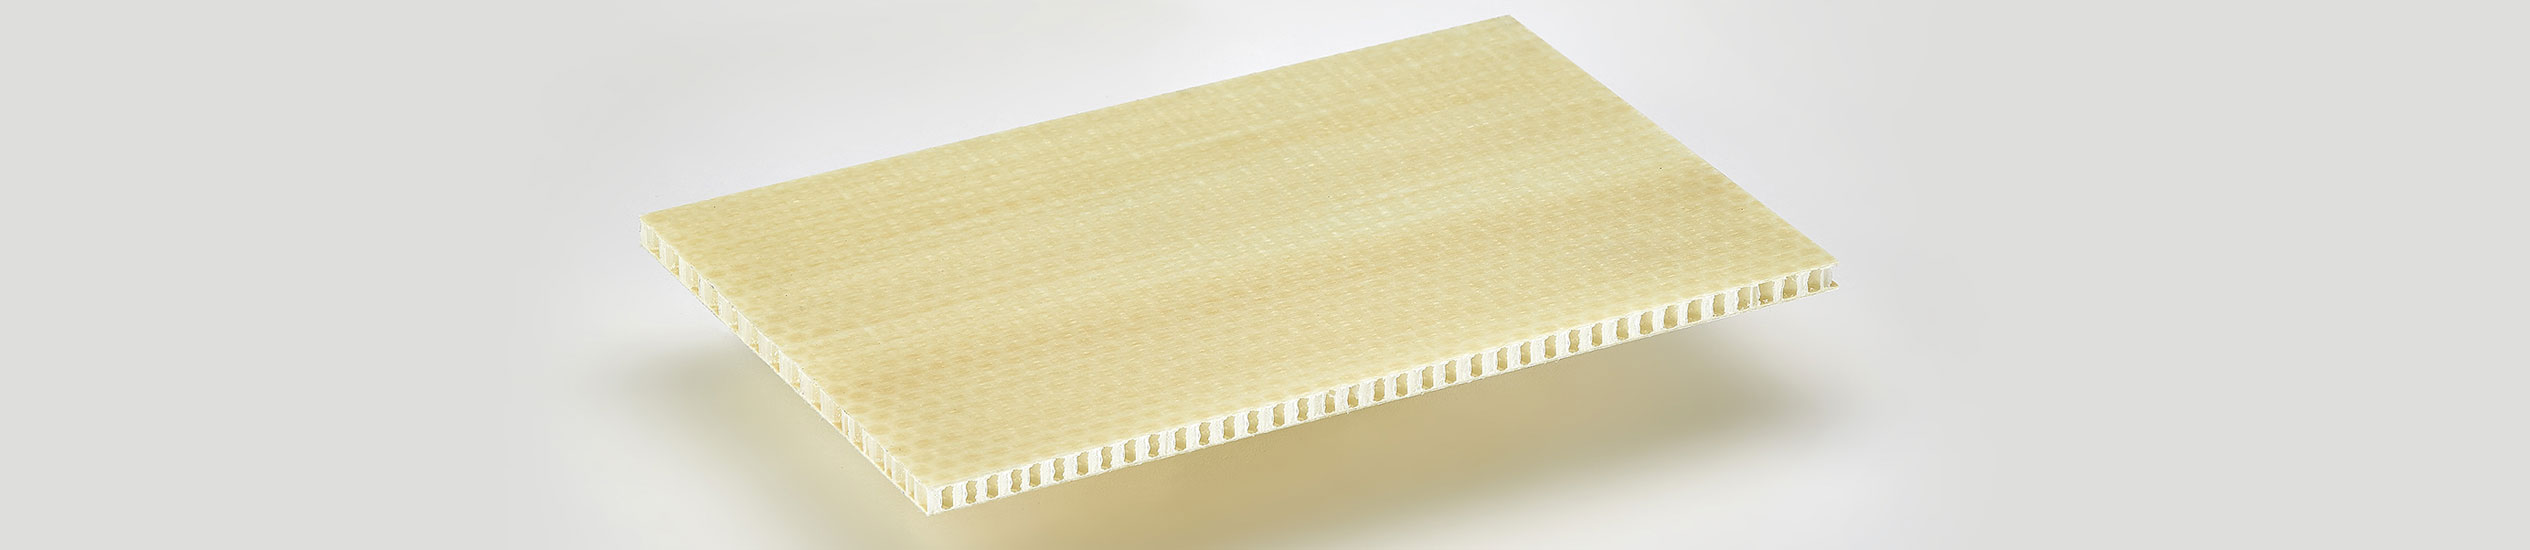 POLISTEP  is a lightweight sandwich panel with a core in polypropylene with glass fiber reinforced with epoxy resin.